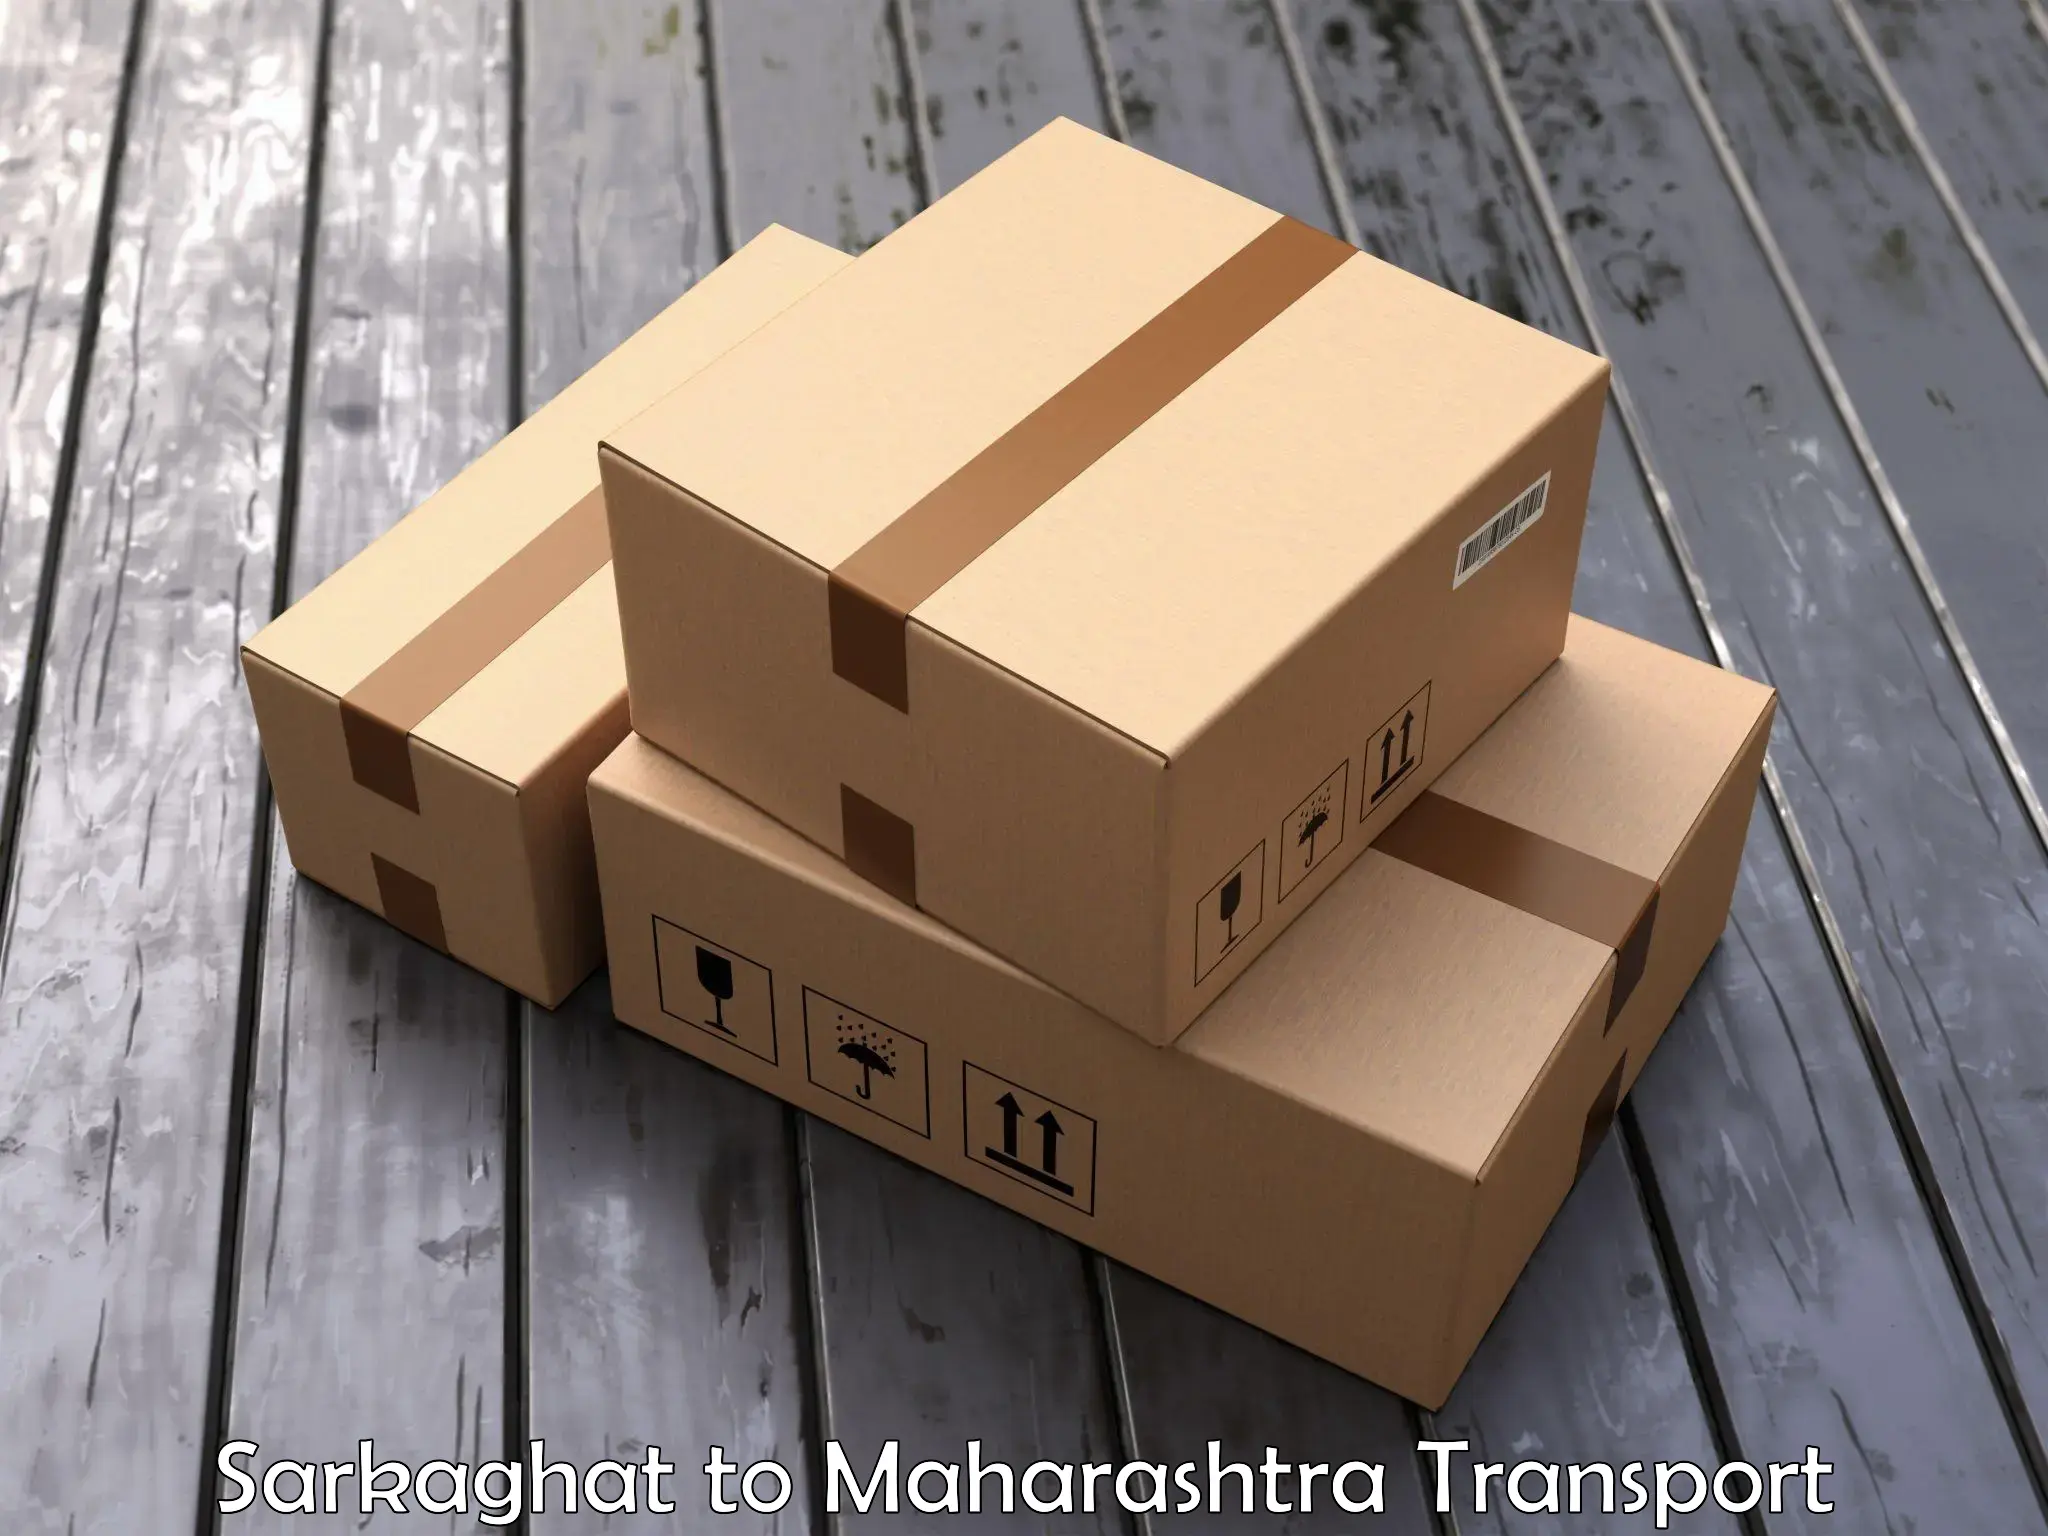 Air freight transport services in Sarkaghat to Mumbai